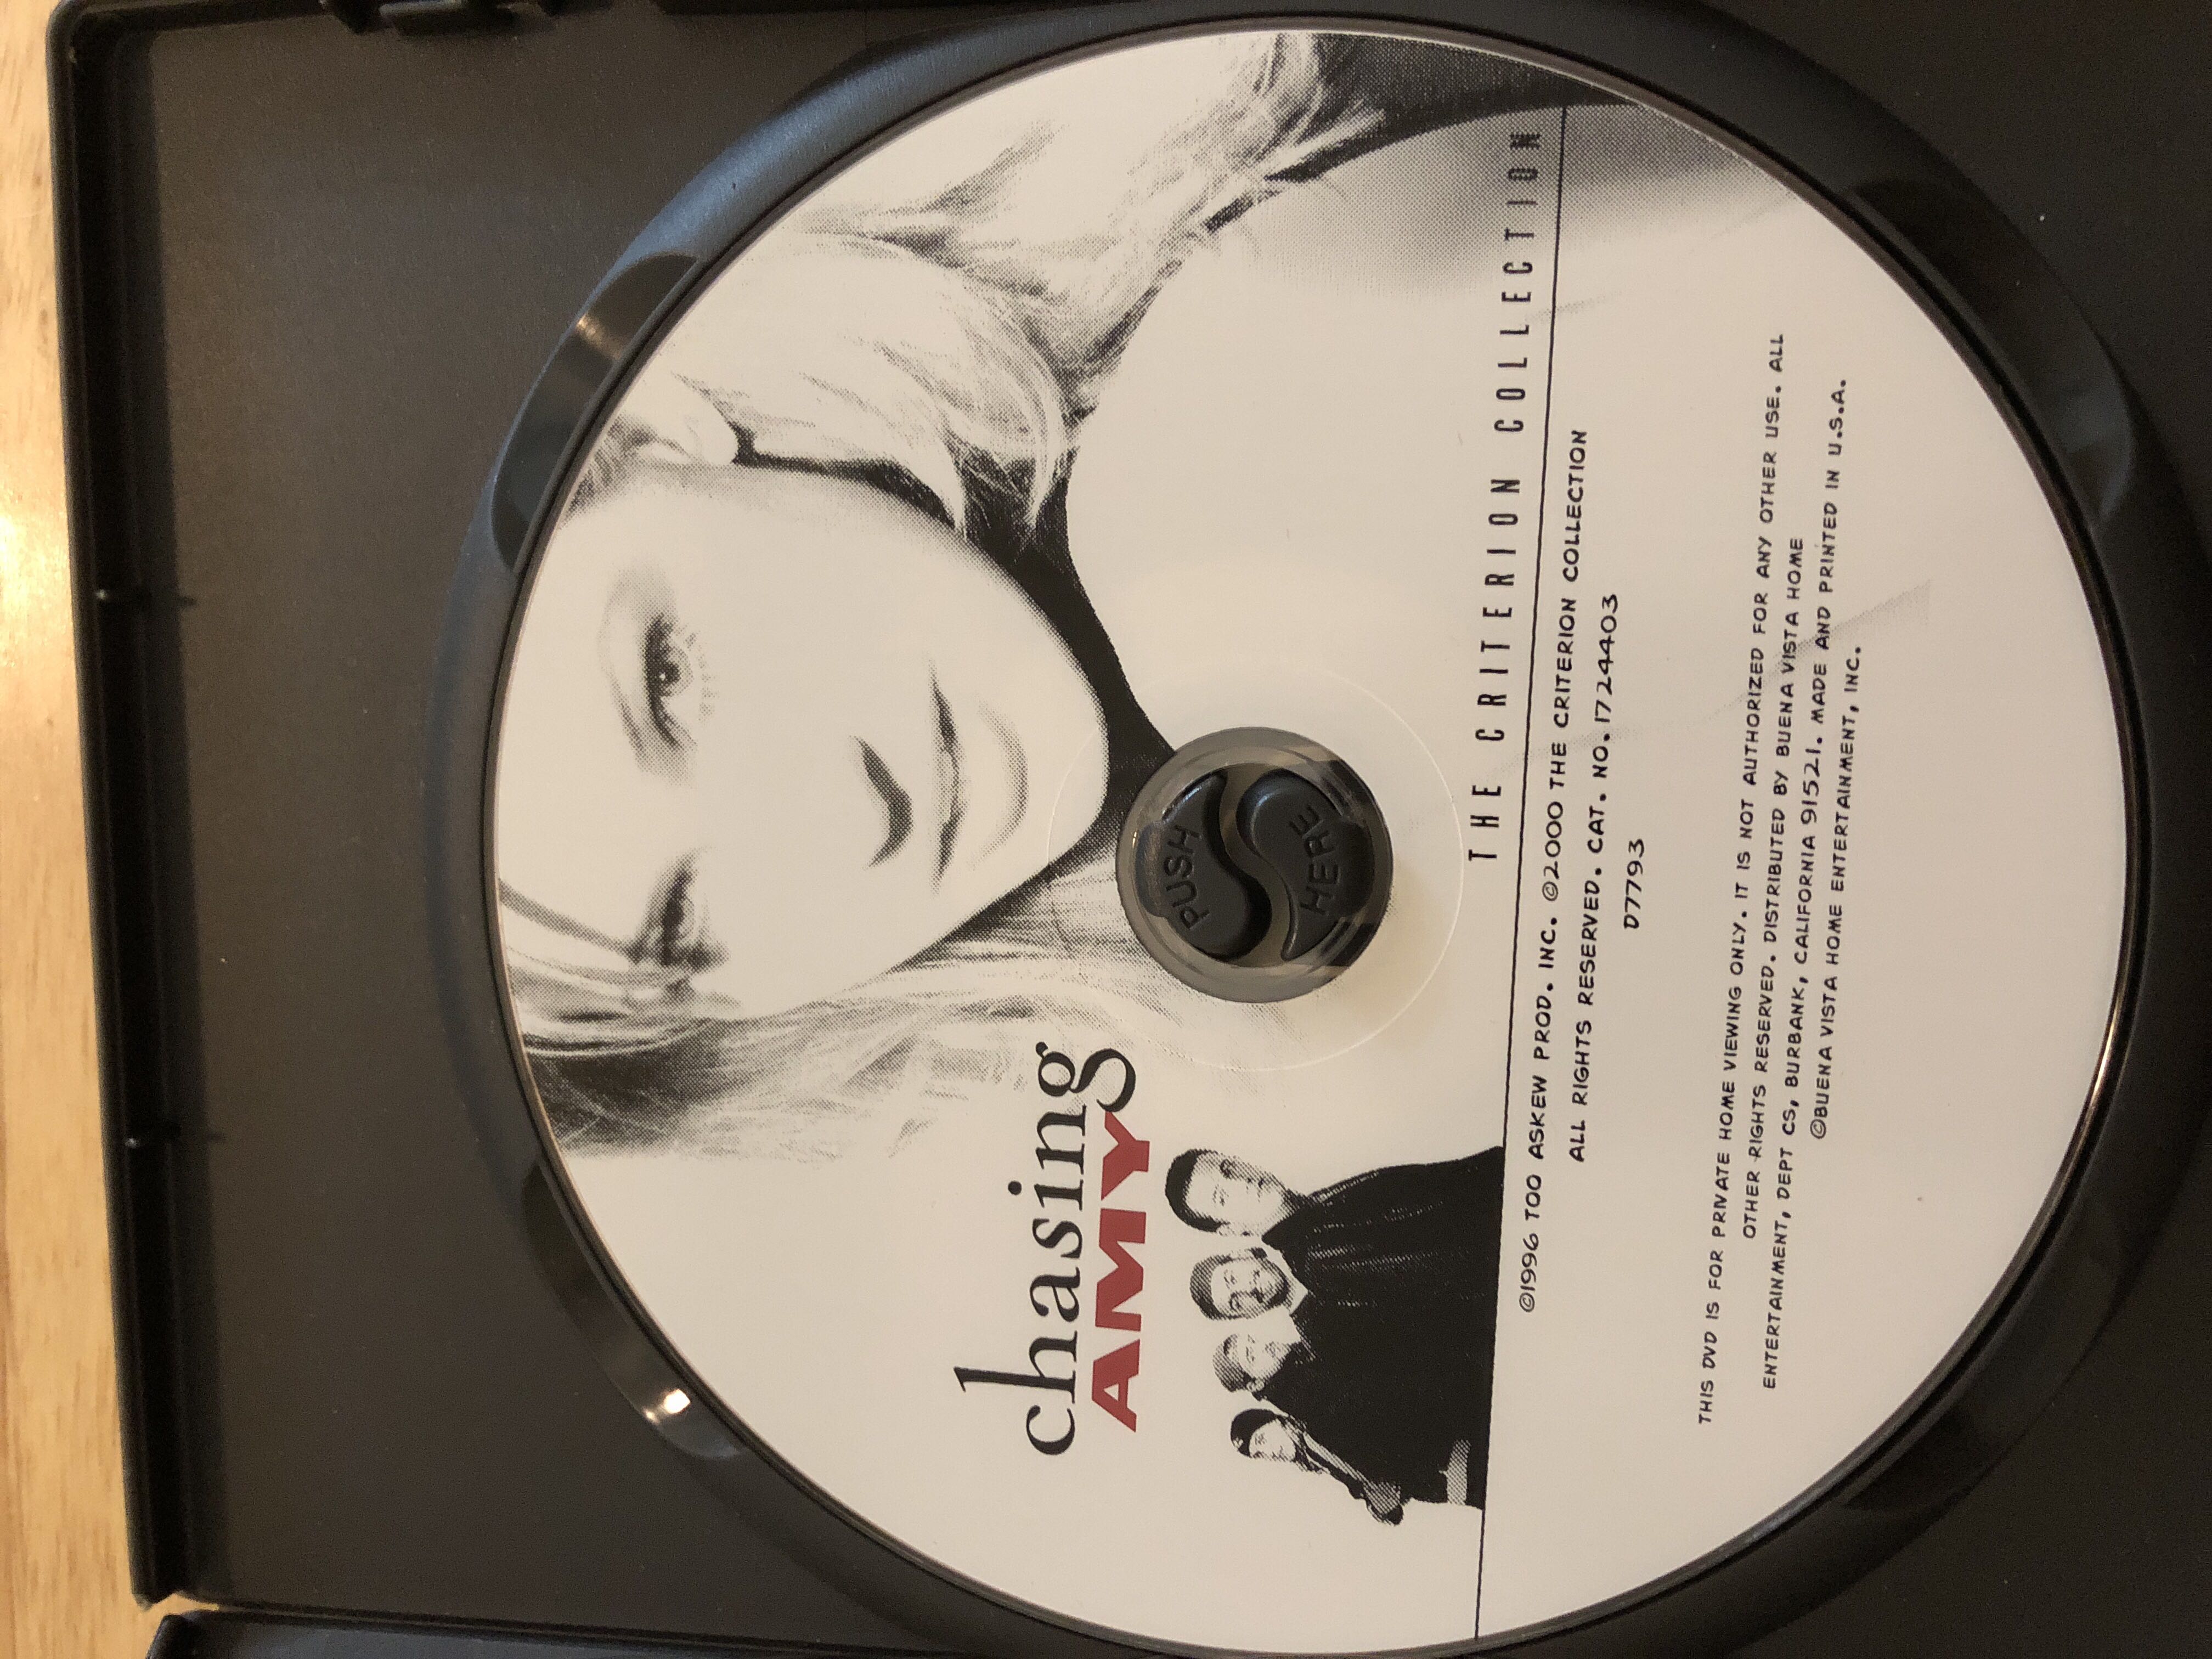 Chasing Amy: The Criterion Collection DVD movie collectible [Barcode 717951002372] - Main Image 3